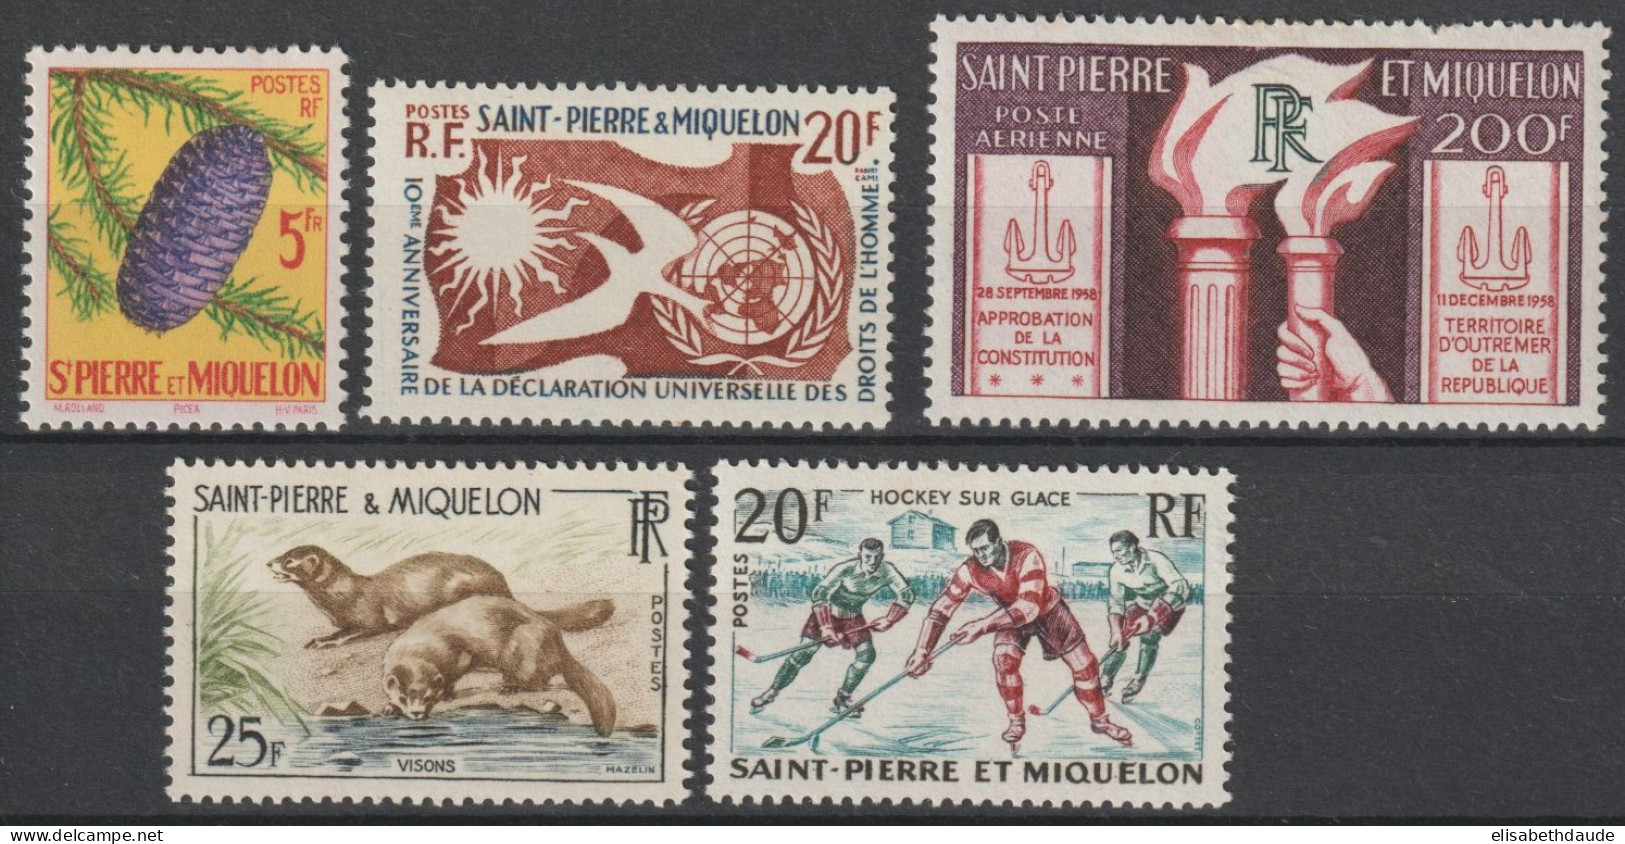 1958/1959 - SPM - ANNEES COMPLETES AVEC POSTE AERIENNE * MH - COTE = 37.5 EUR. - Full Years